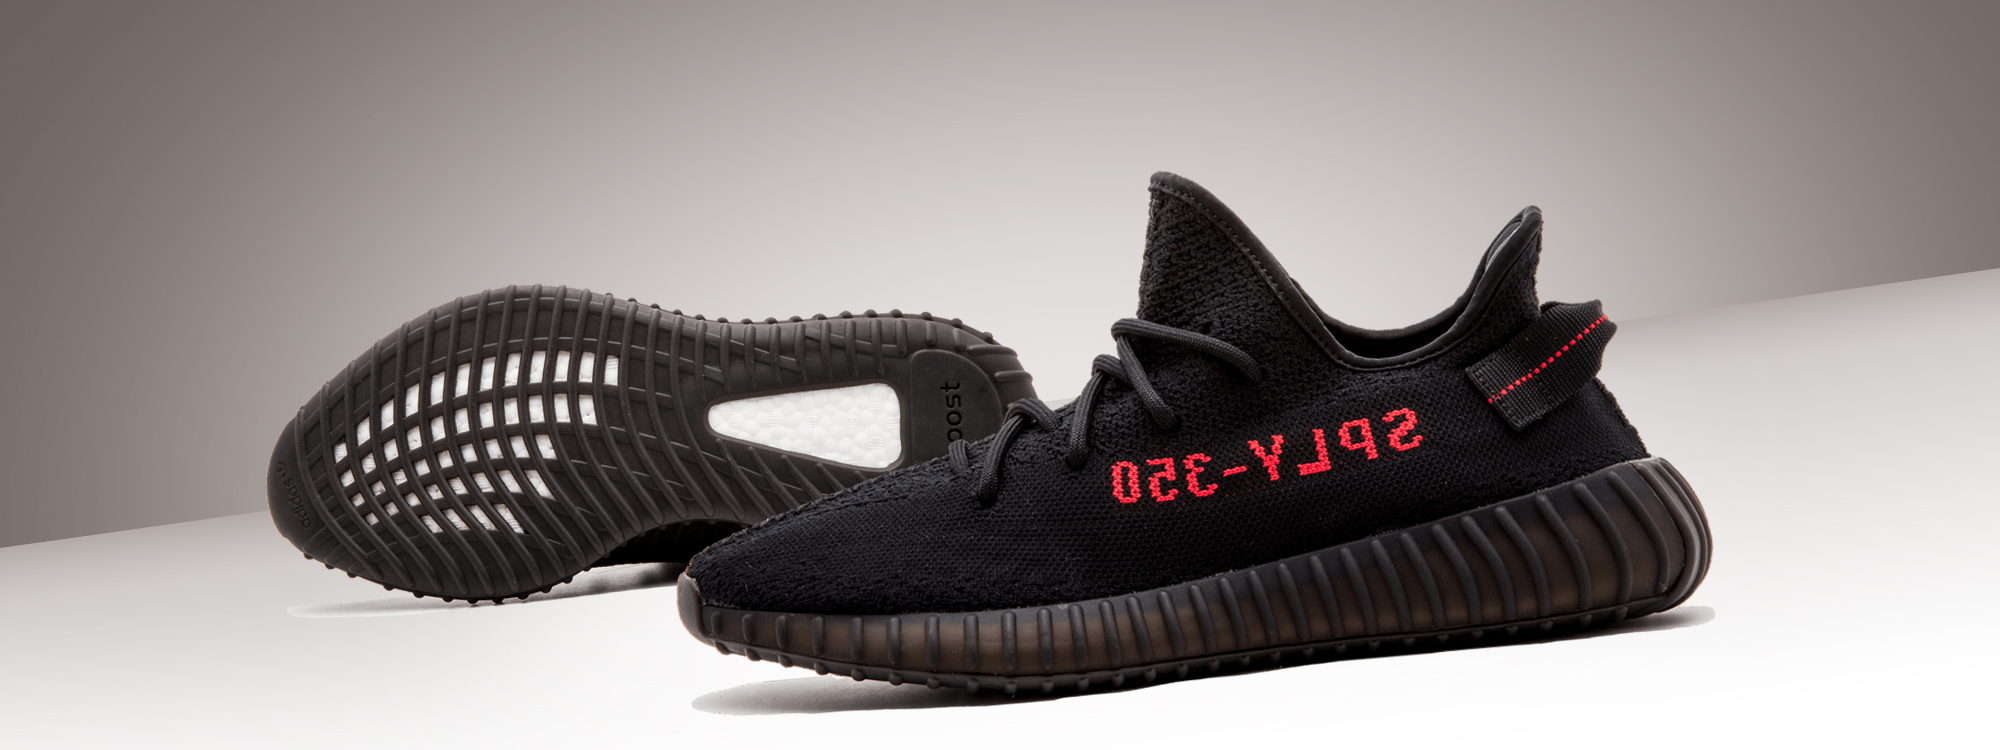 buy real  Yeezy Boost 350 V2 Core Black Red / Bred for 195 USD only